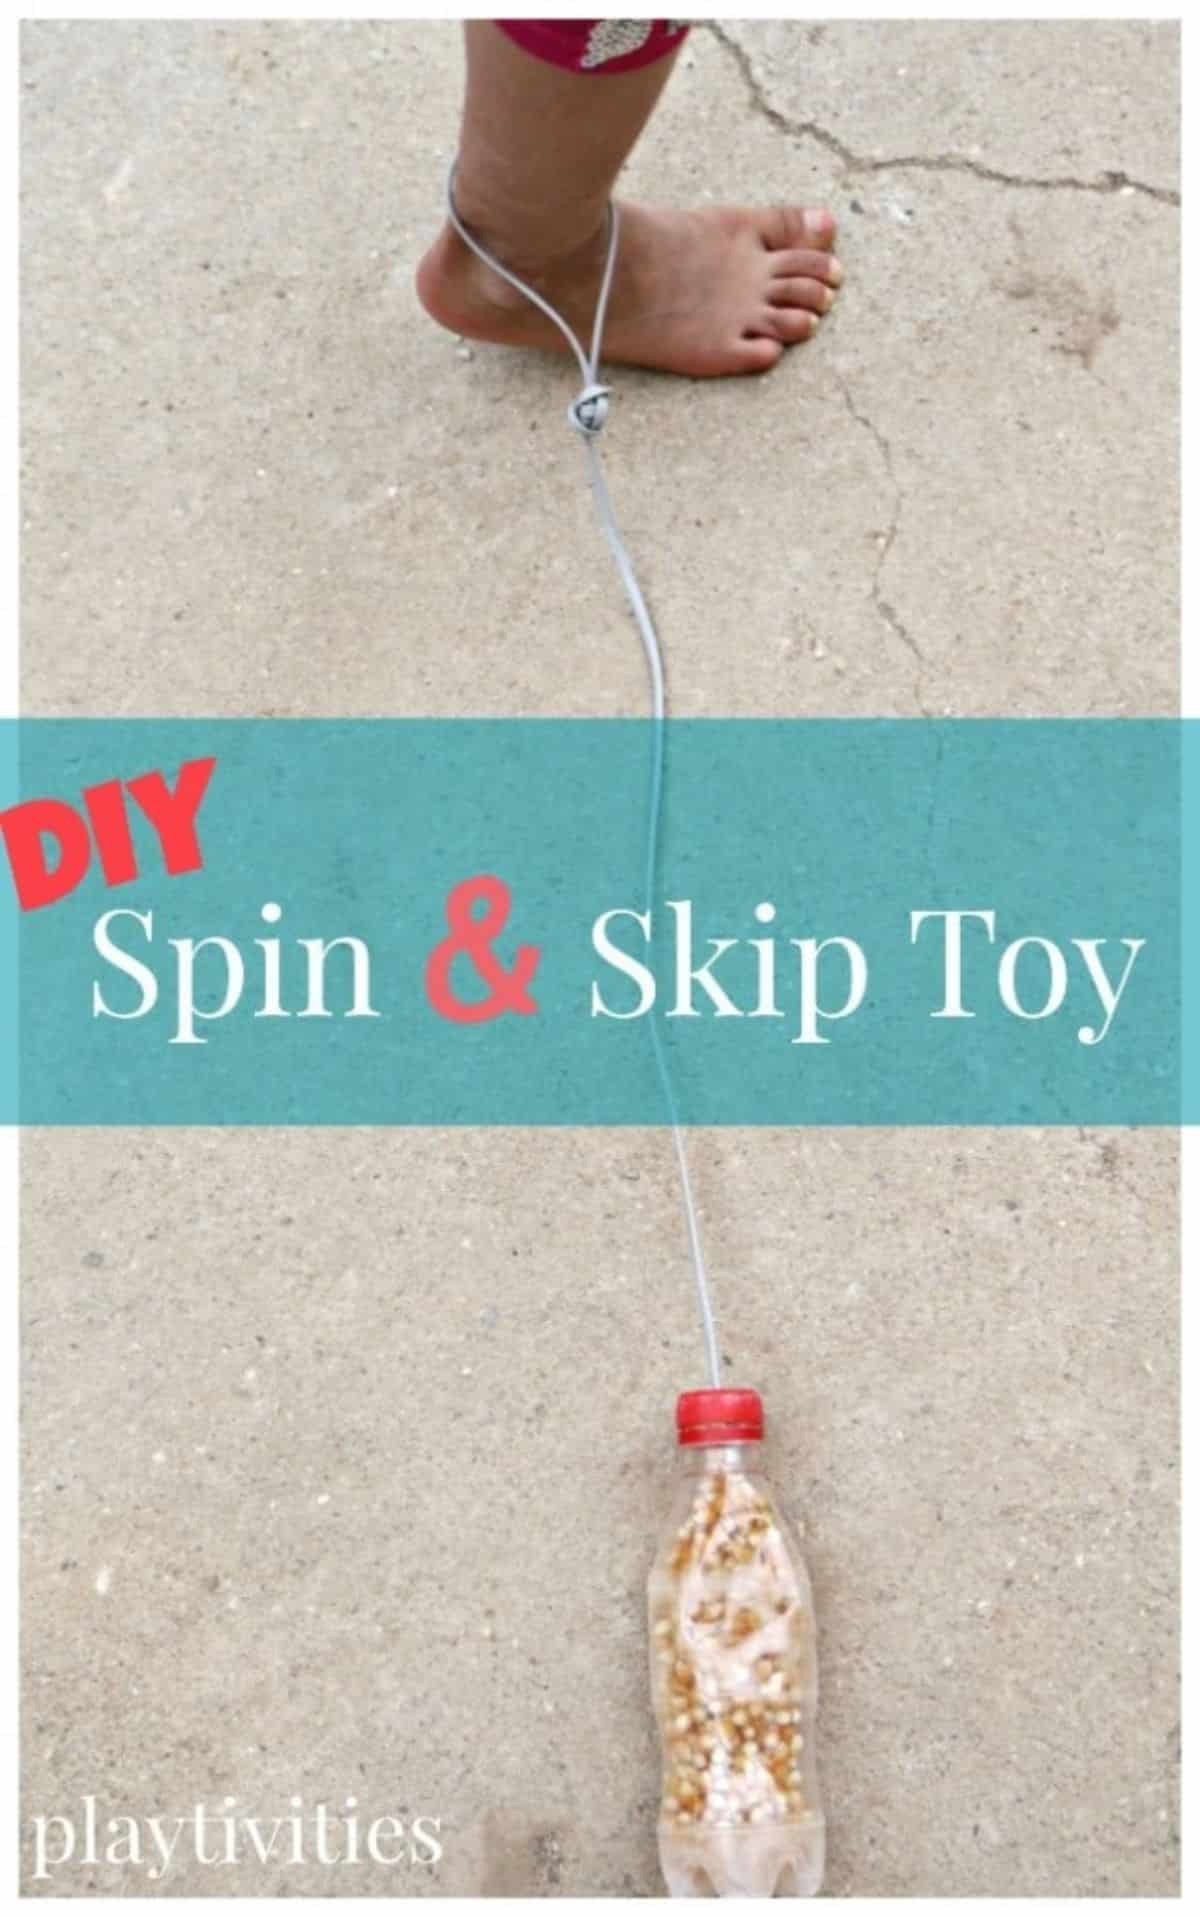 Plastic bottle attached to a leg with a thin rope as spin- skip toy.